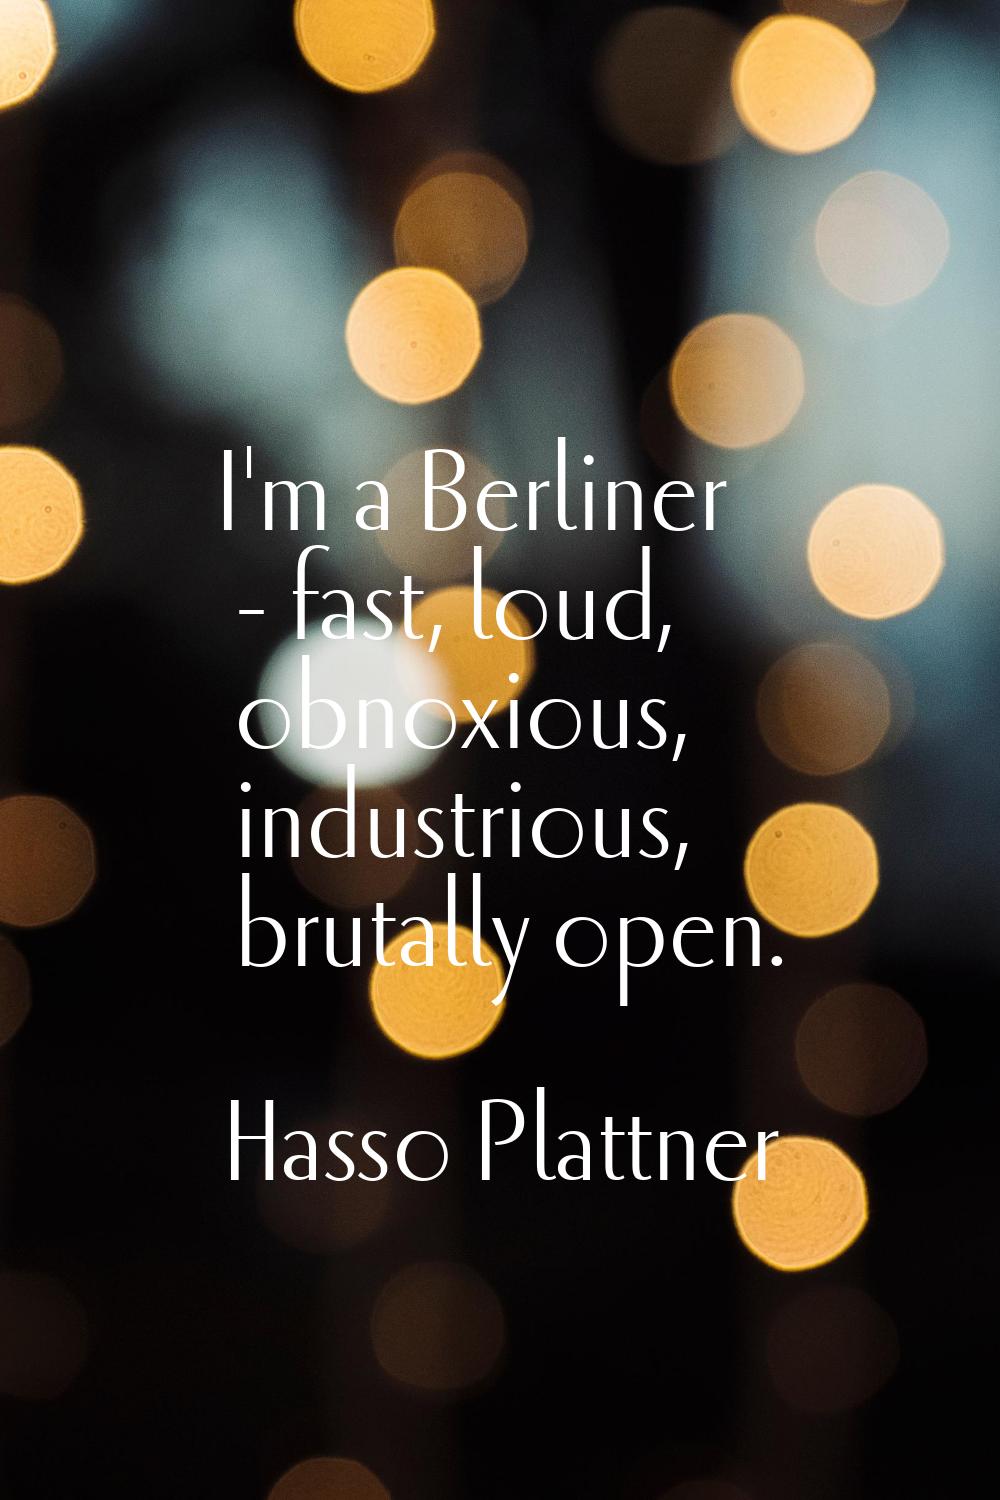 I'm a Berliner - fast, loud, obnoxious, industrious, brutally open.